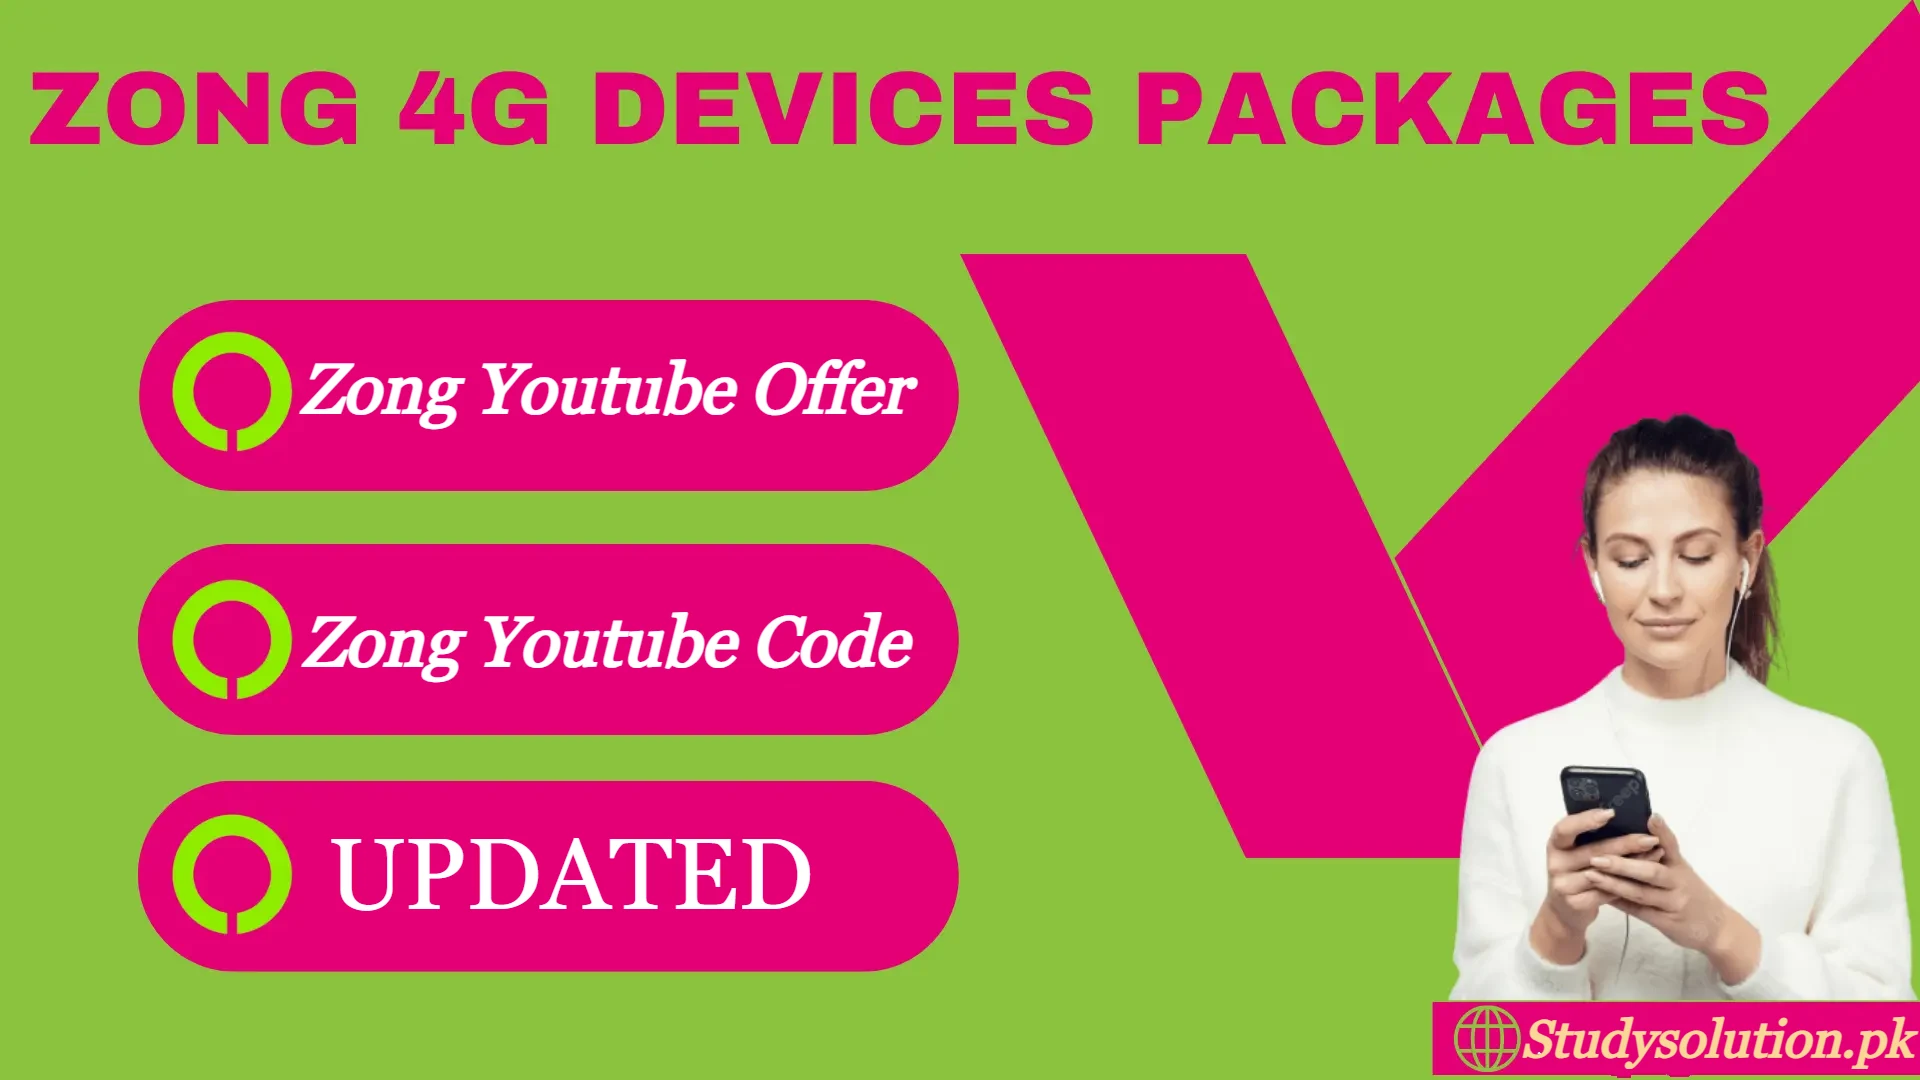 Get the dial code details of Zong Free Youtube Code and get inte internet for youtube streaming